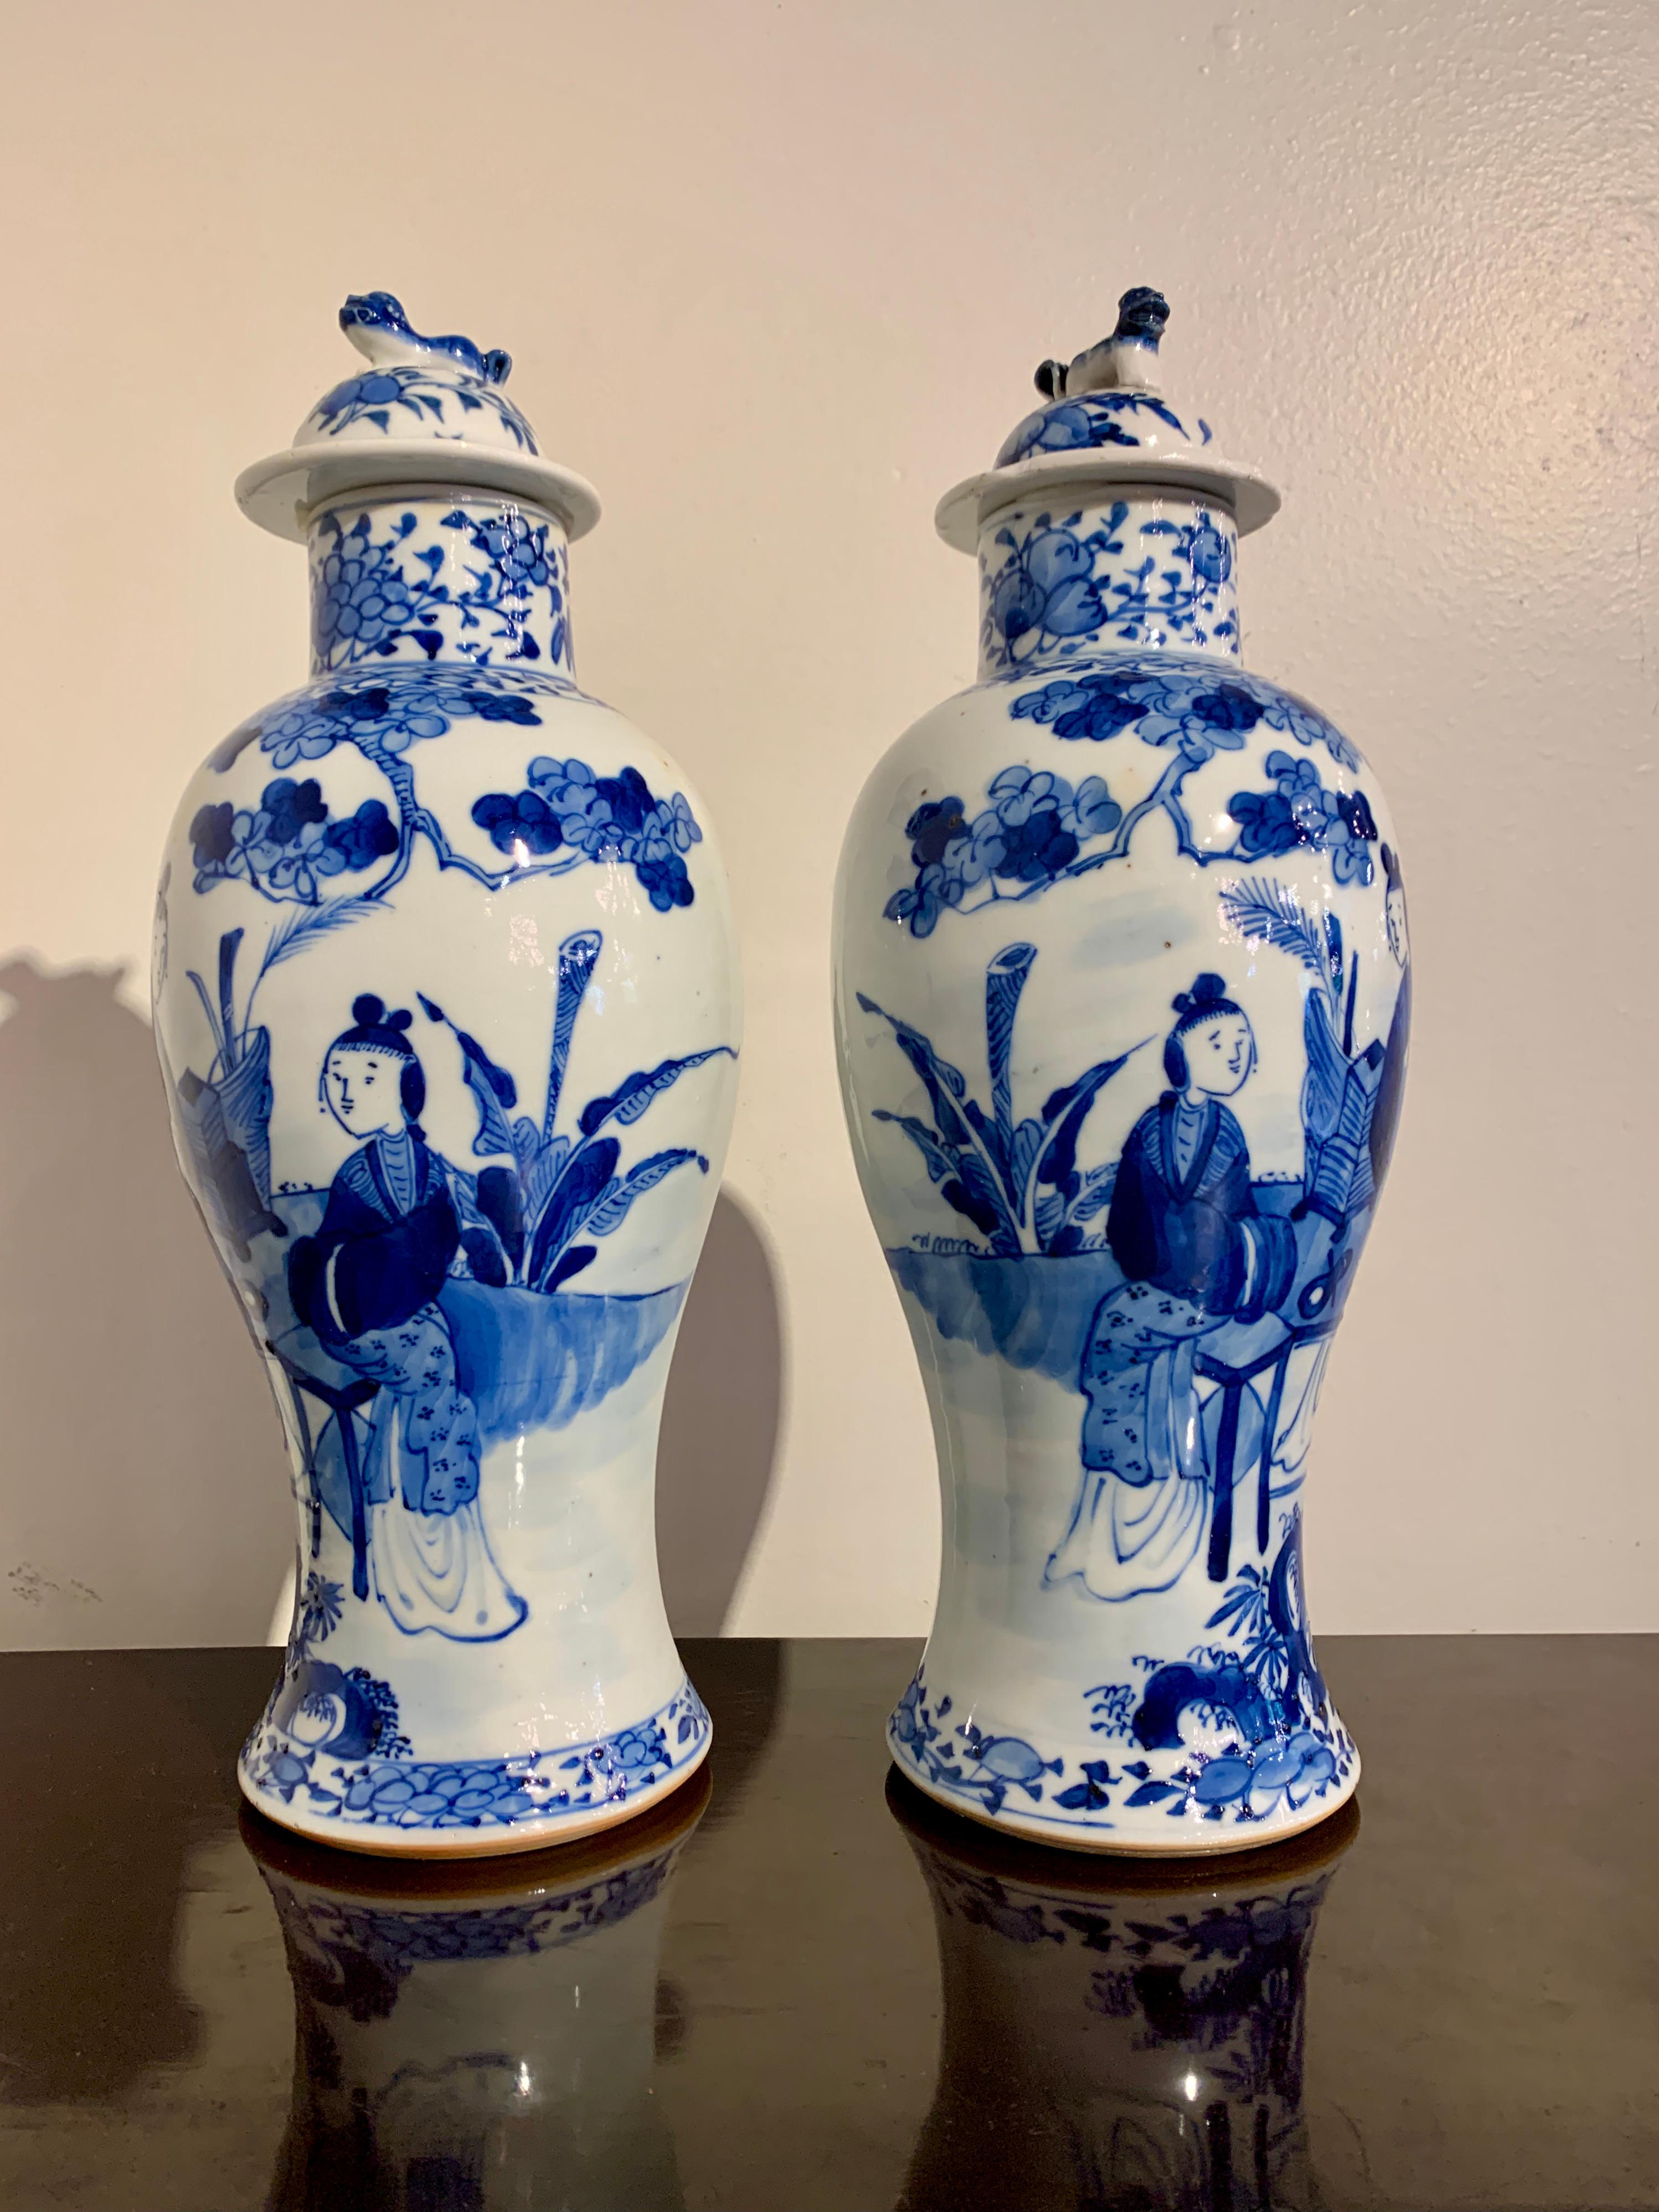 A lovely pair of Chinese blue and white glazed covered baluster jars or vases, qing dynasty, late 19th century, China.

The tall and slim vases of baluster form and surmounted by a cover topped with a foo dog. The slight bodies of the vases